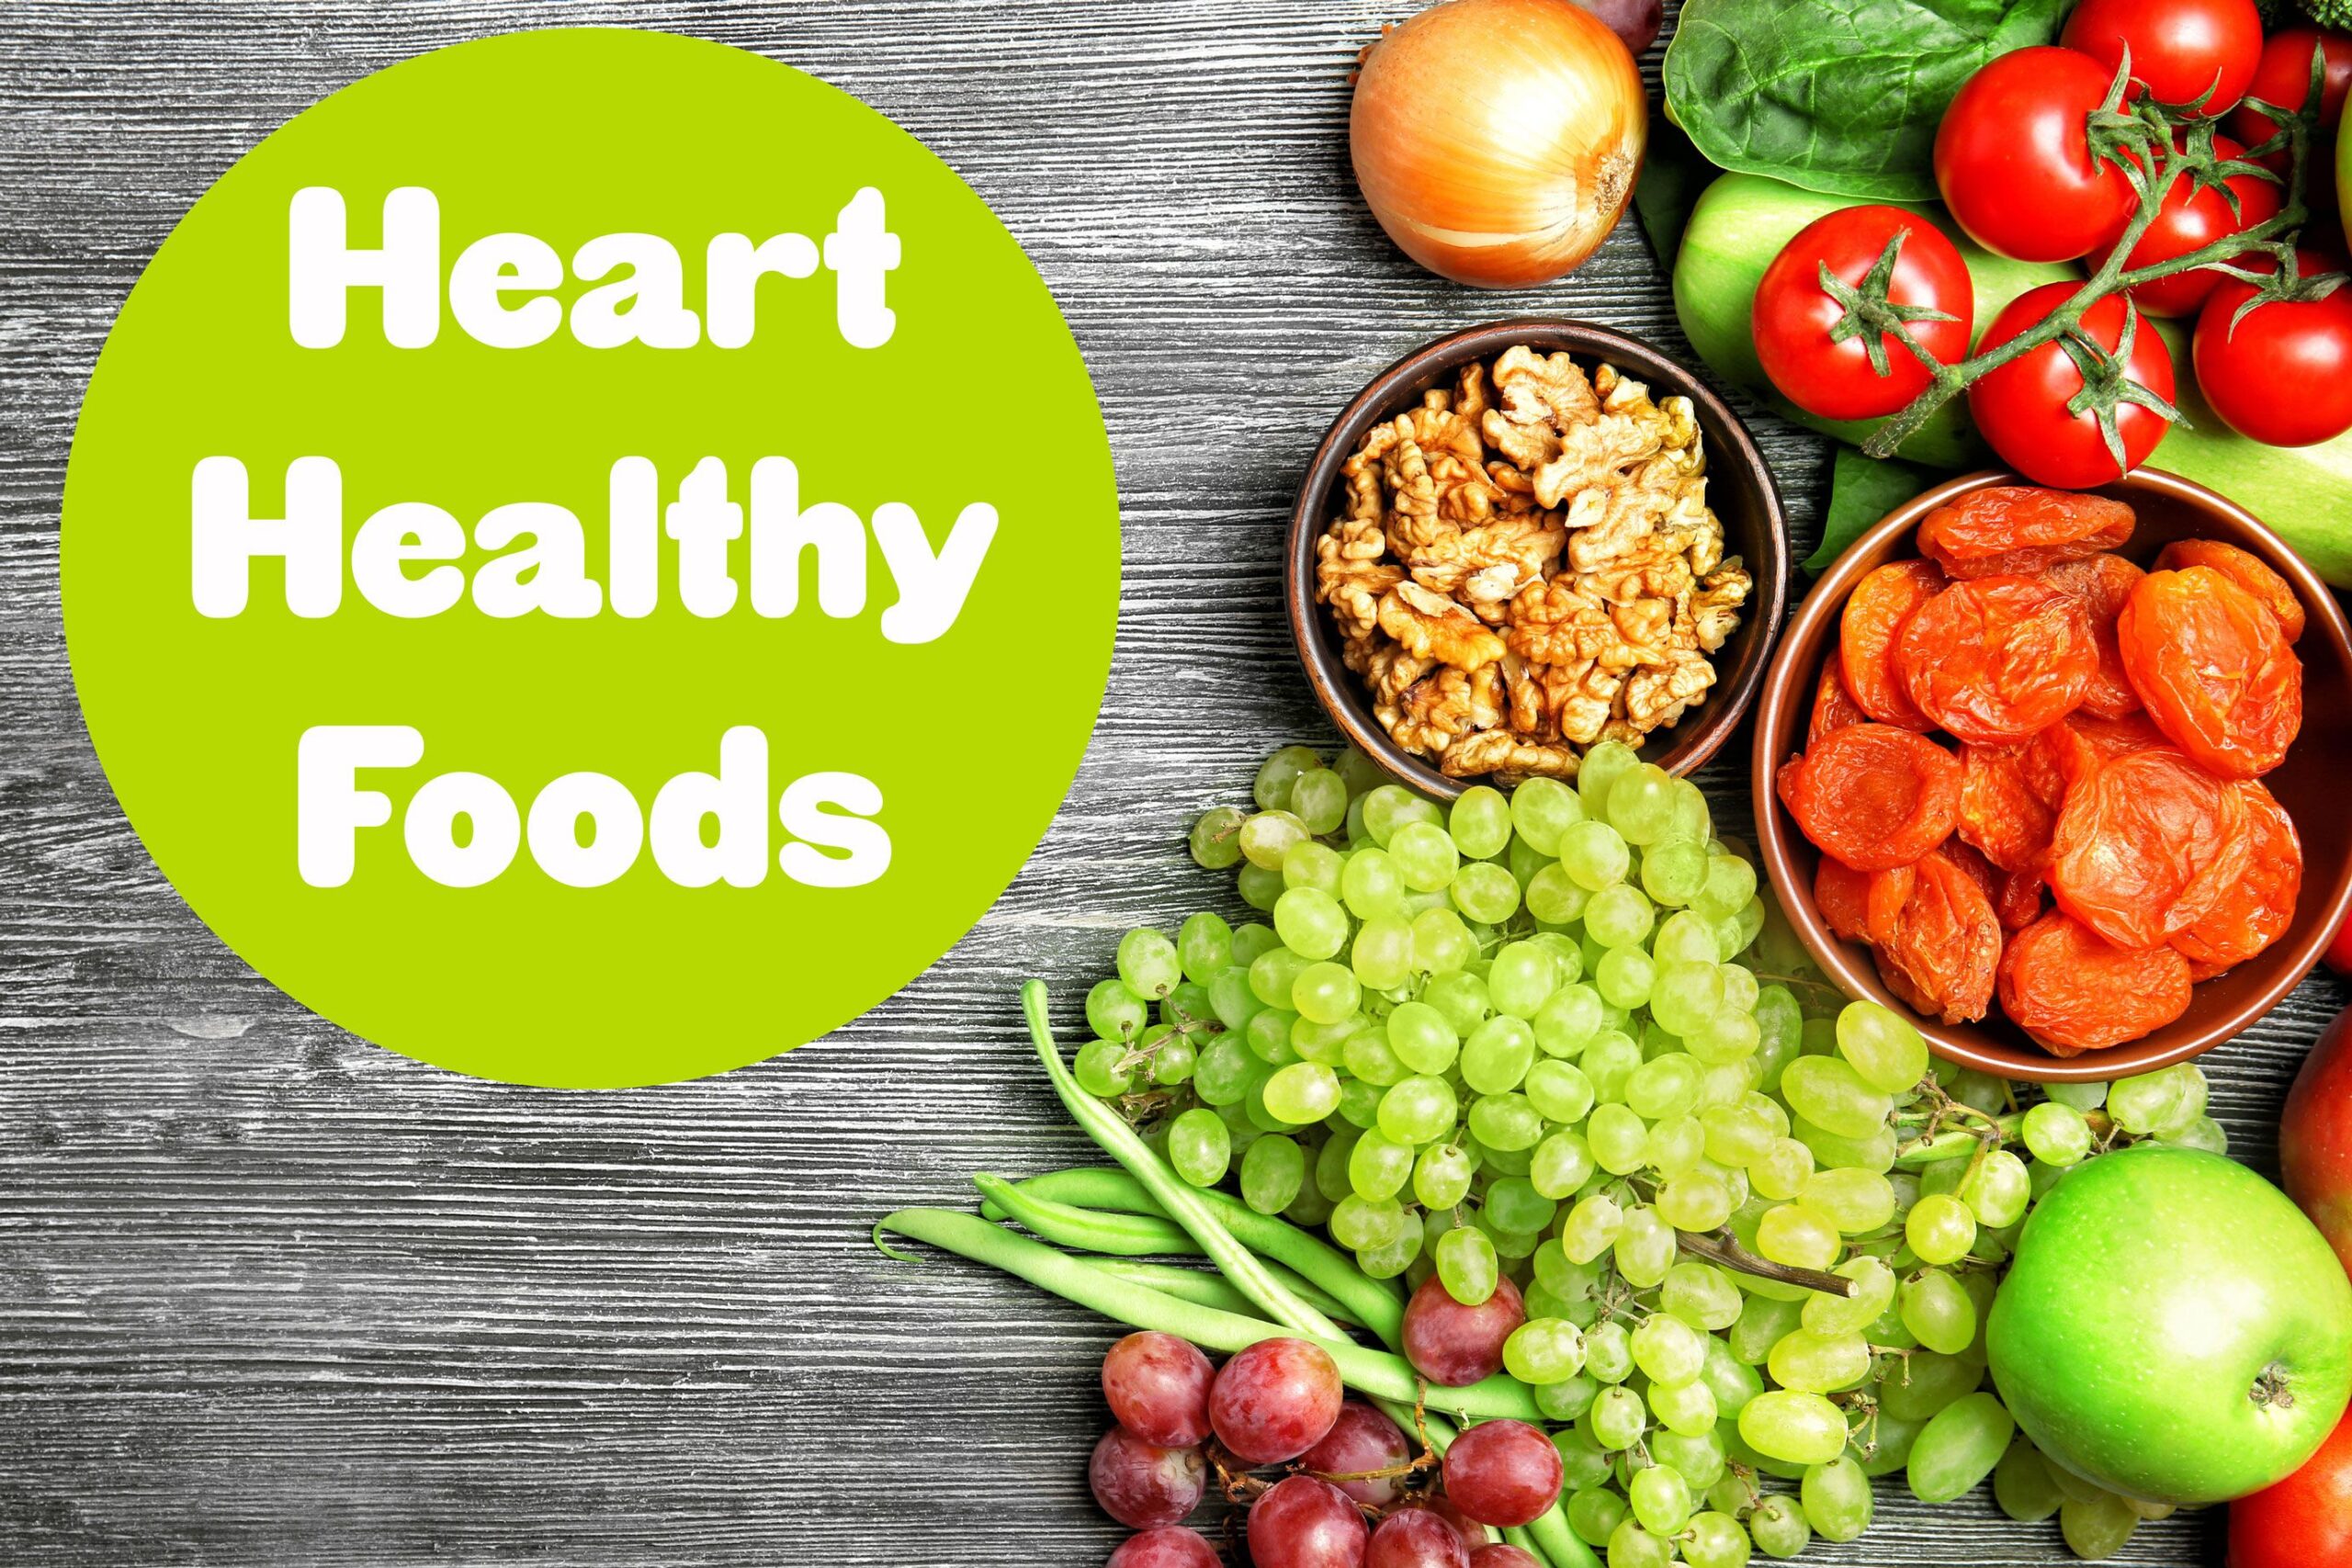 Eat Smart, Love Your Heart: Portion Control, Nutrient Powerhouses & Meal Planning